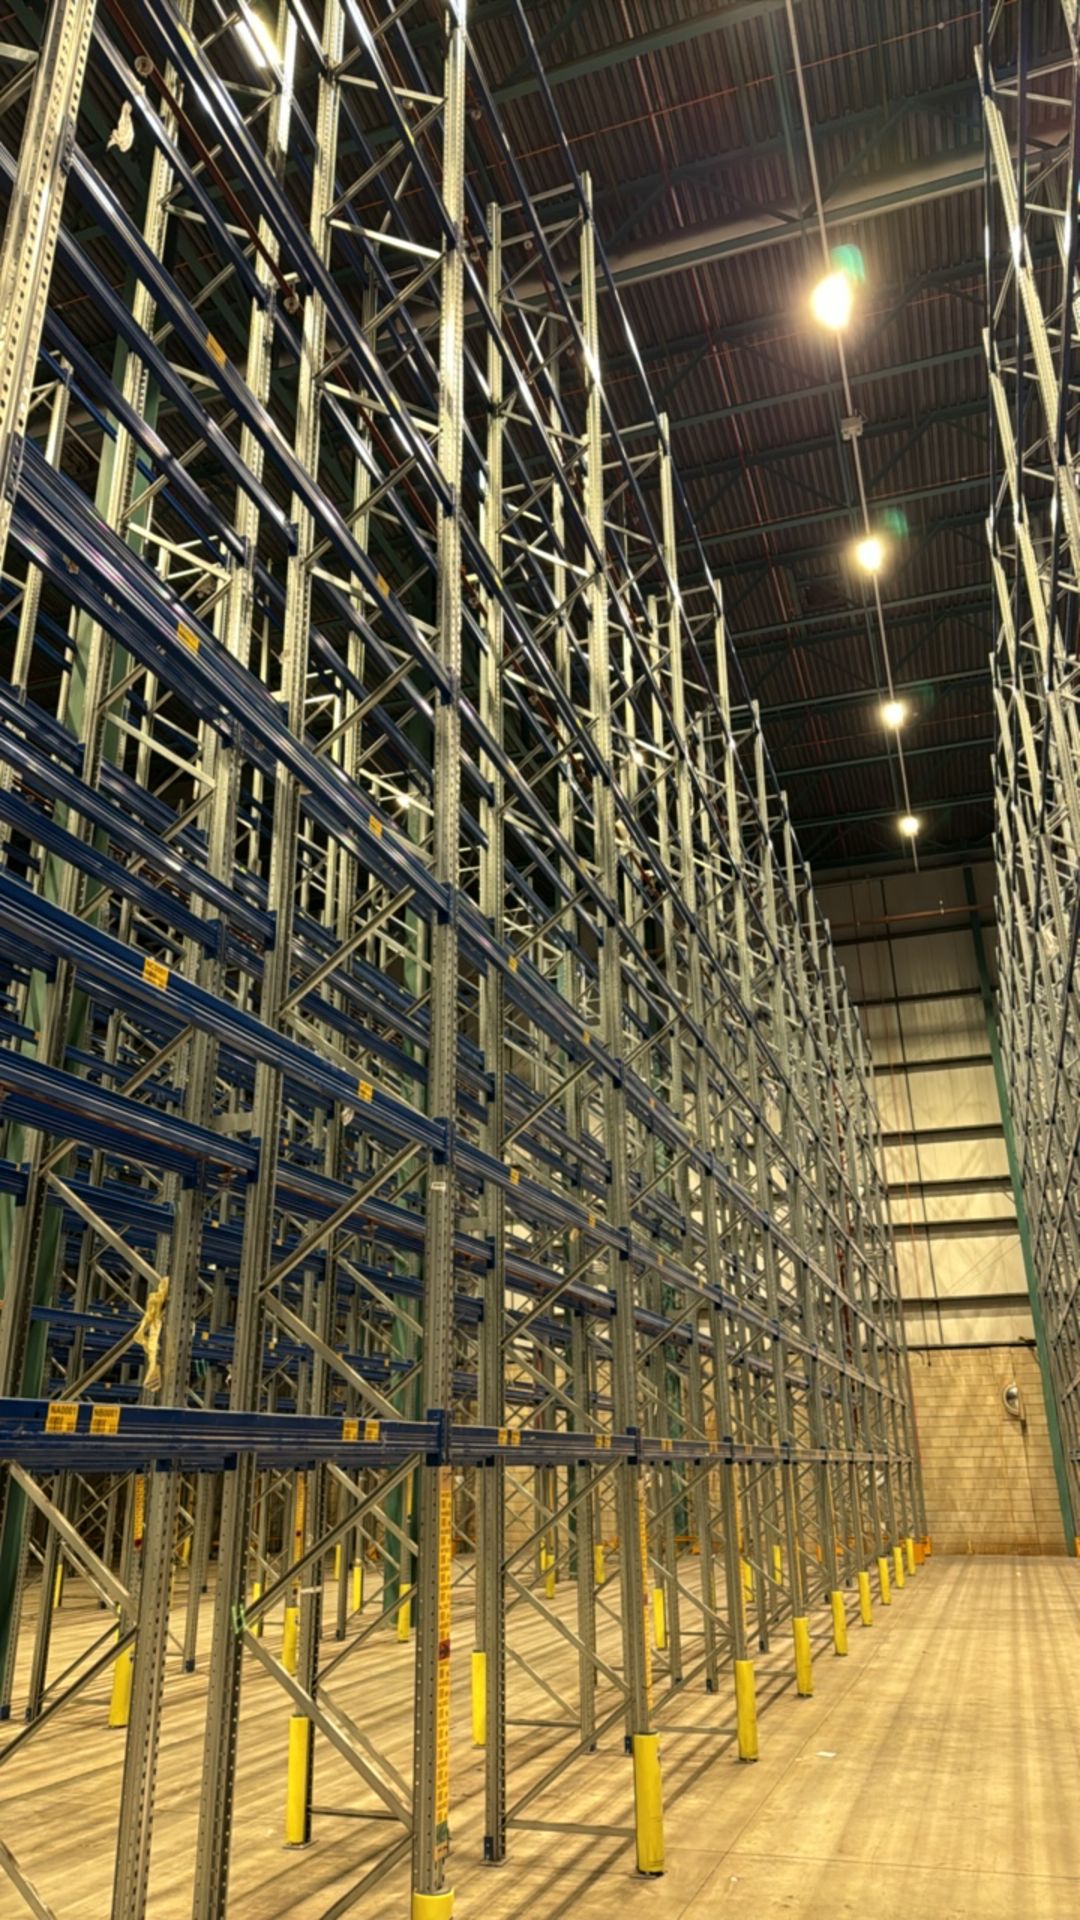 Run Of 22 Bays Of Back To Back Boltless Pallet Racking - Image 4 of 10